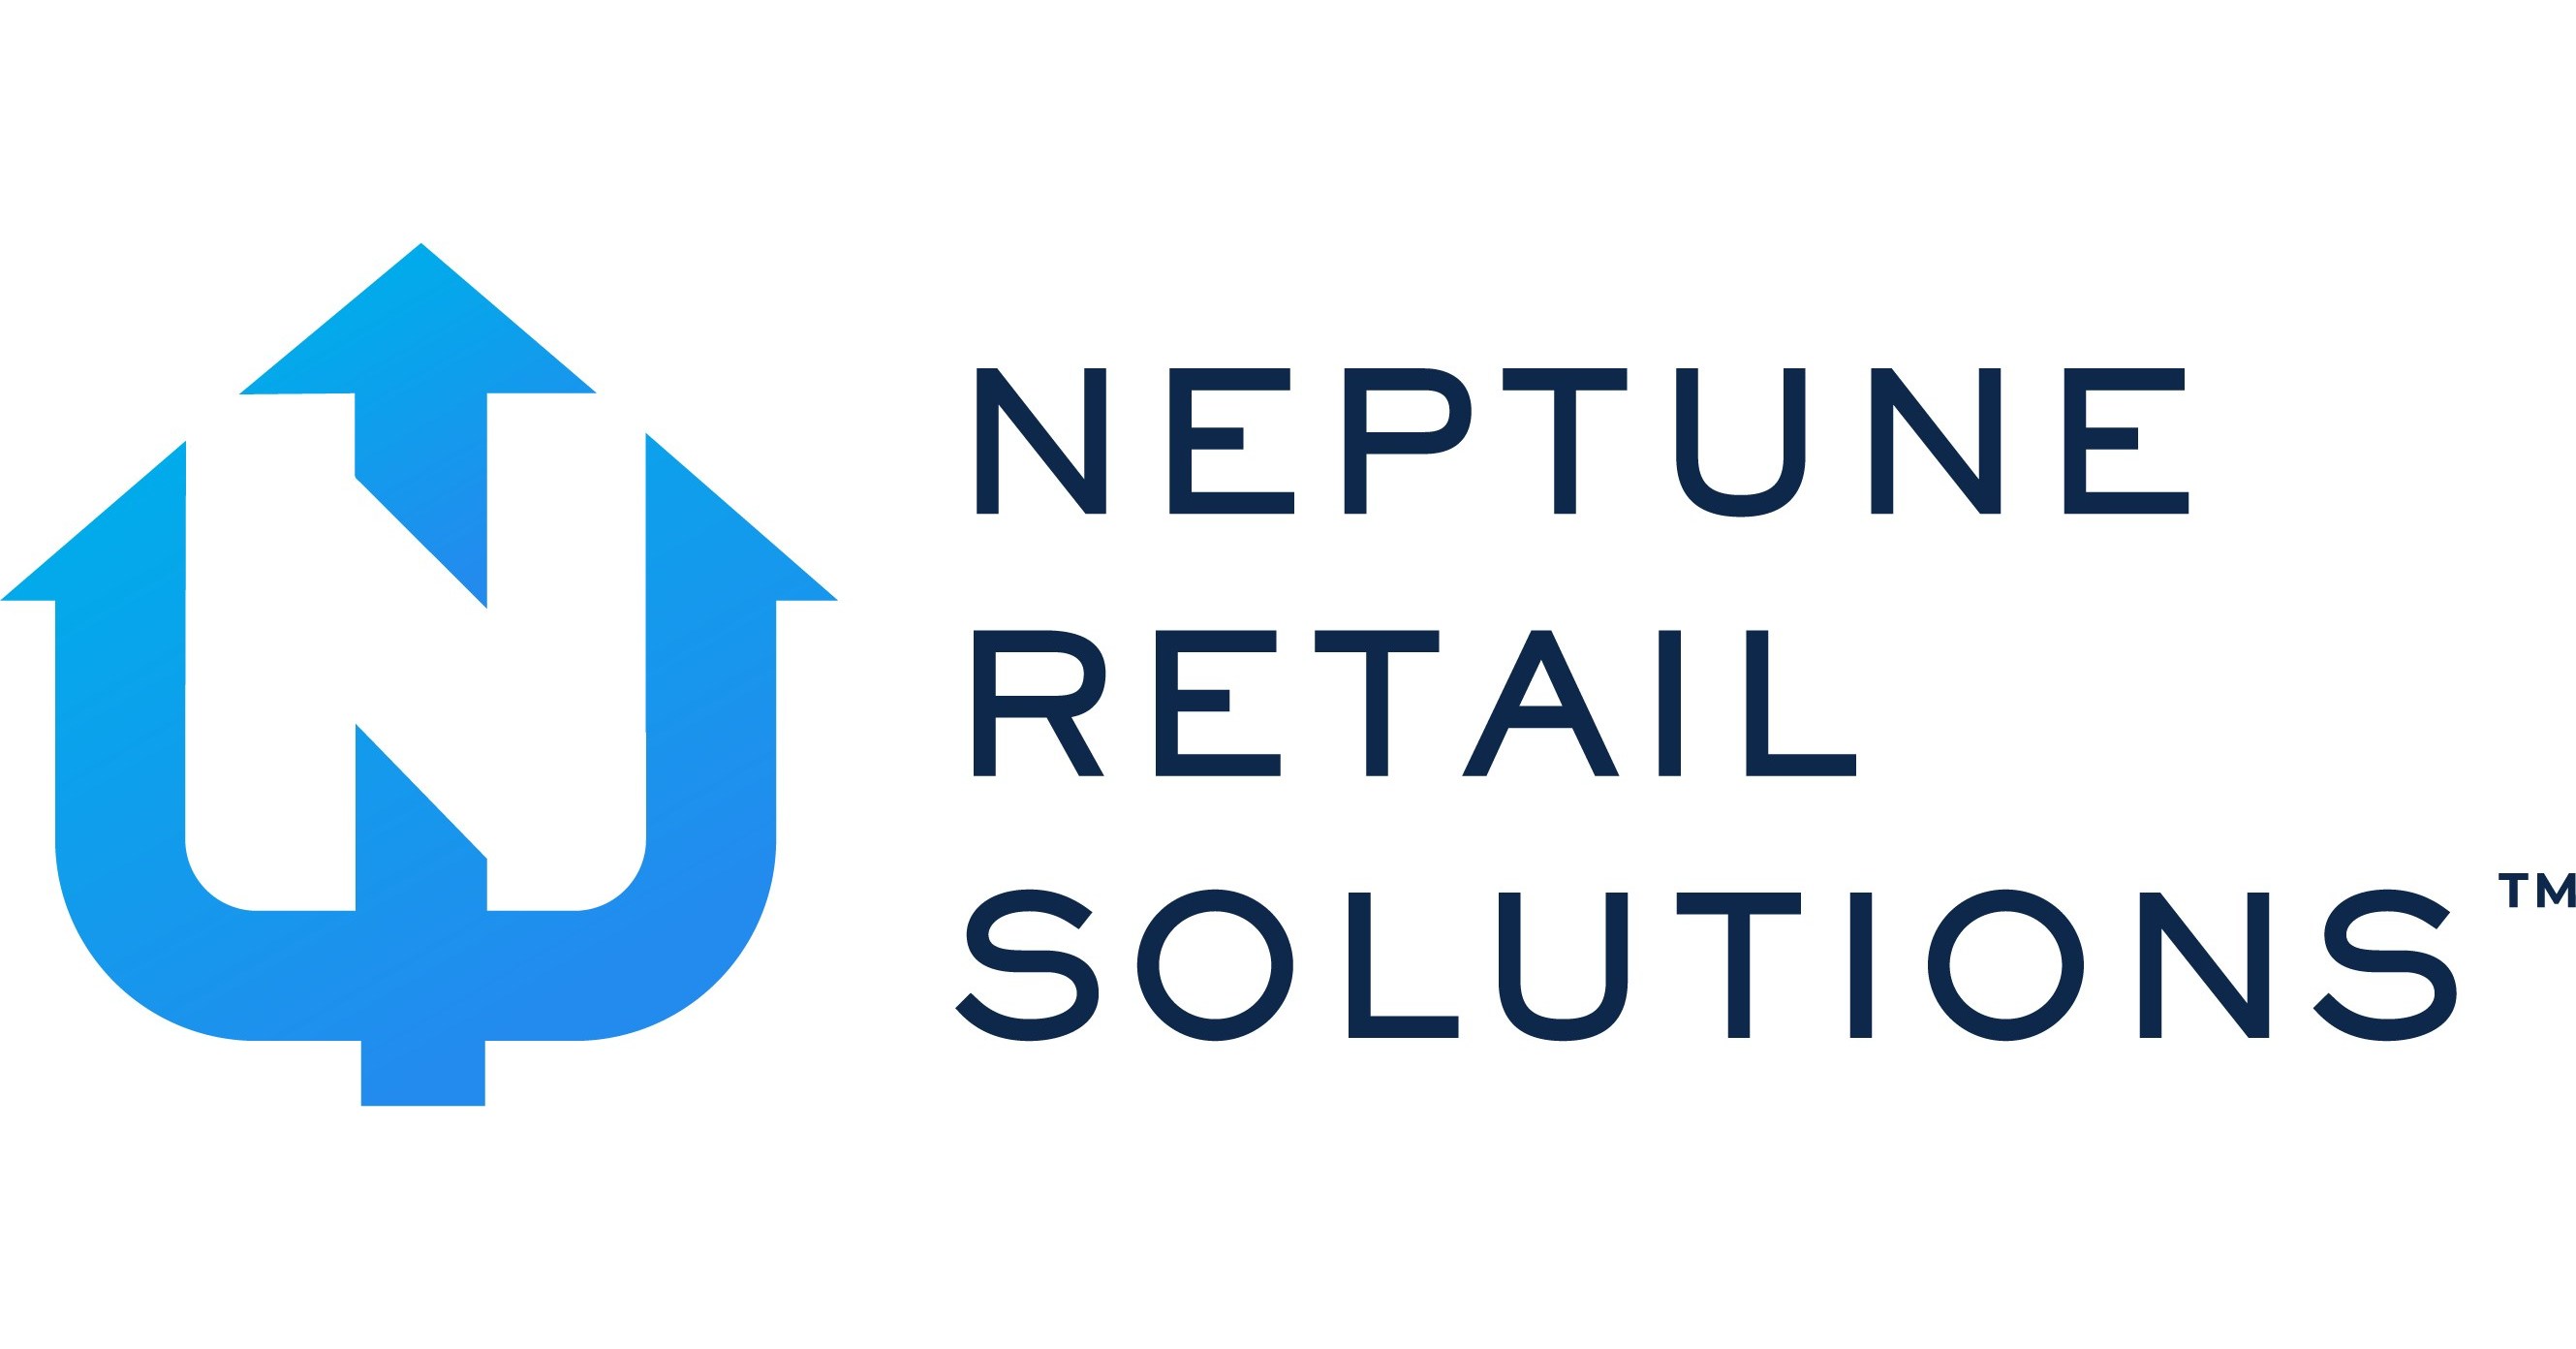 Neptune Retail Solutions Delivers Up to 9% Sales Lift for Over 625 Adult Beverage Brands, Led by Growing National Rebate Network